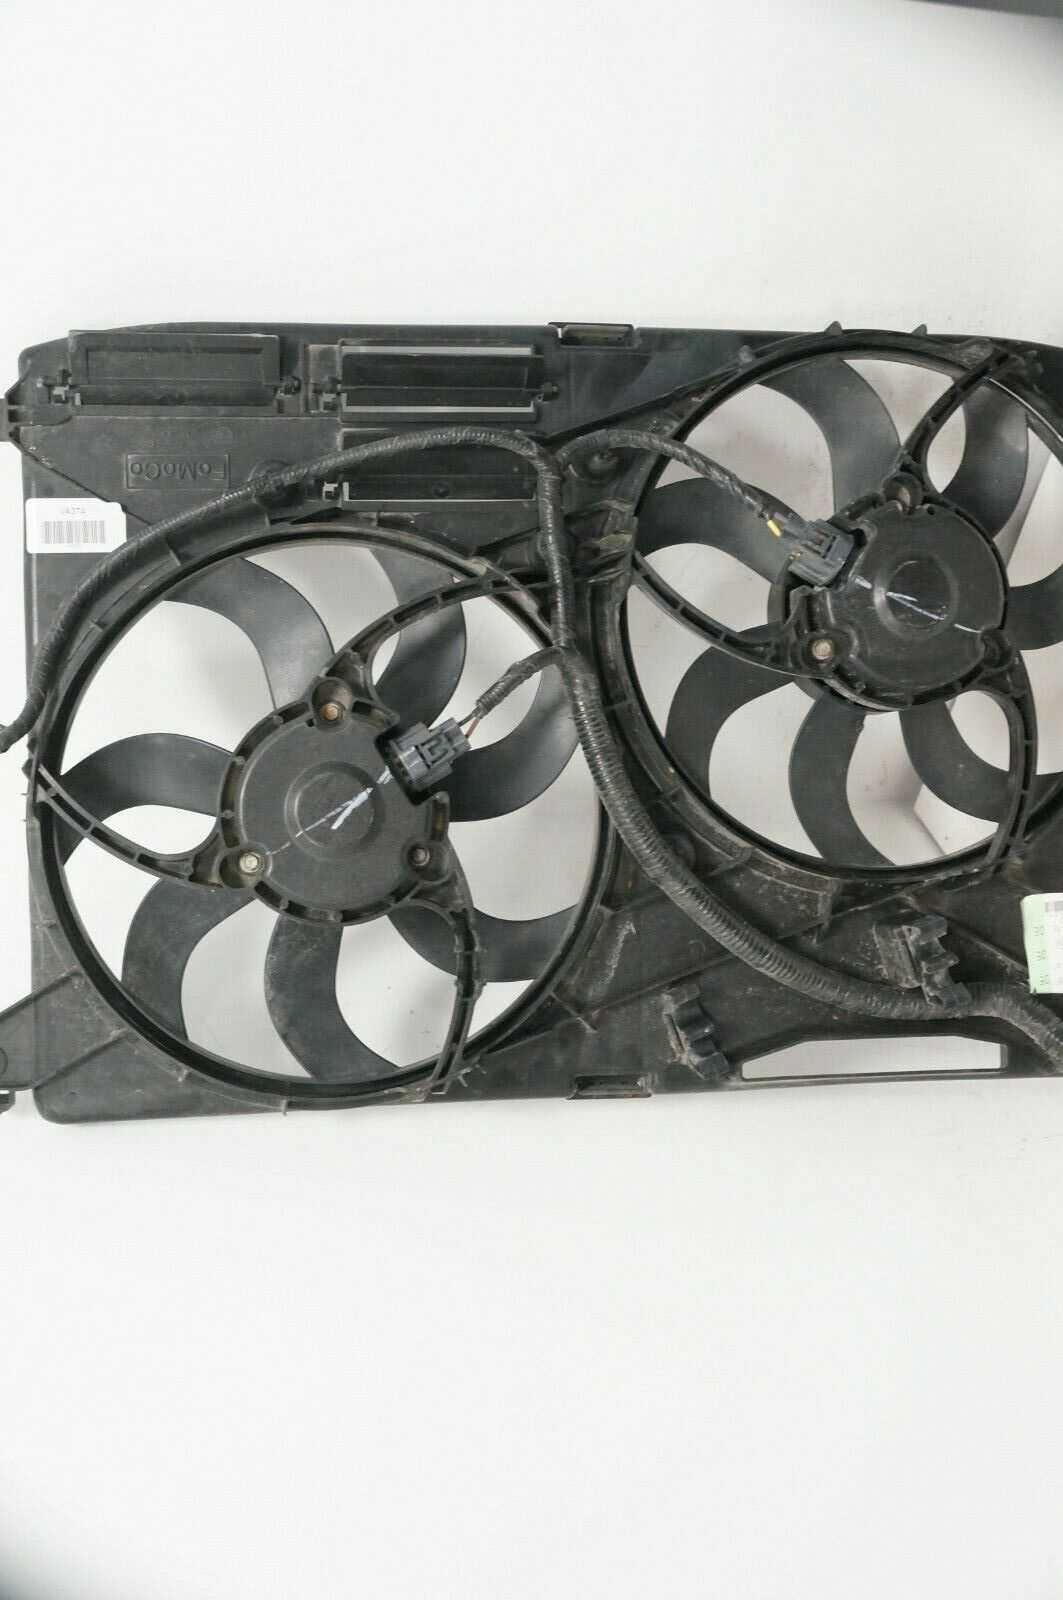 2014 - 2016 Ford Fusion Engine Cooling Fan 10890520 OEM Alshned Auto Parts